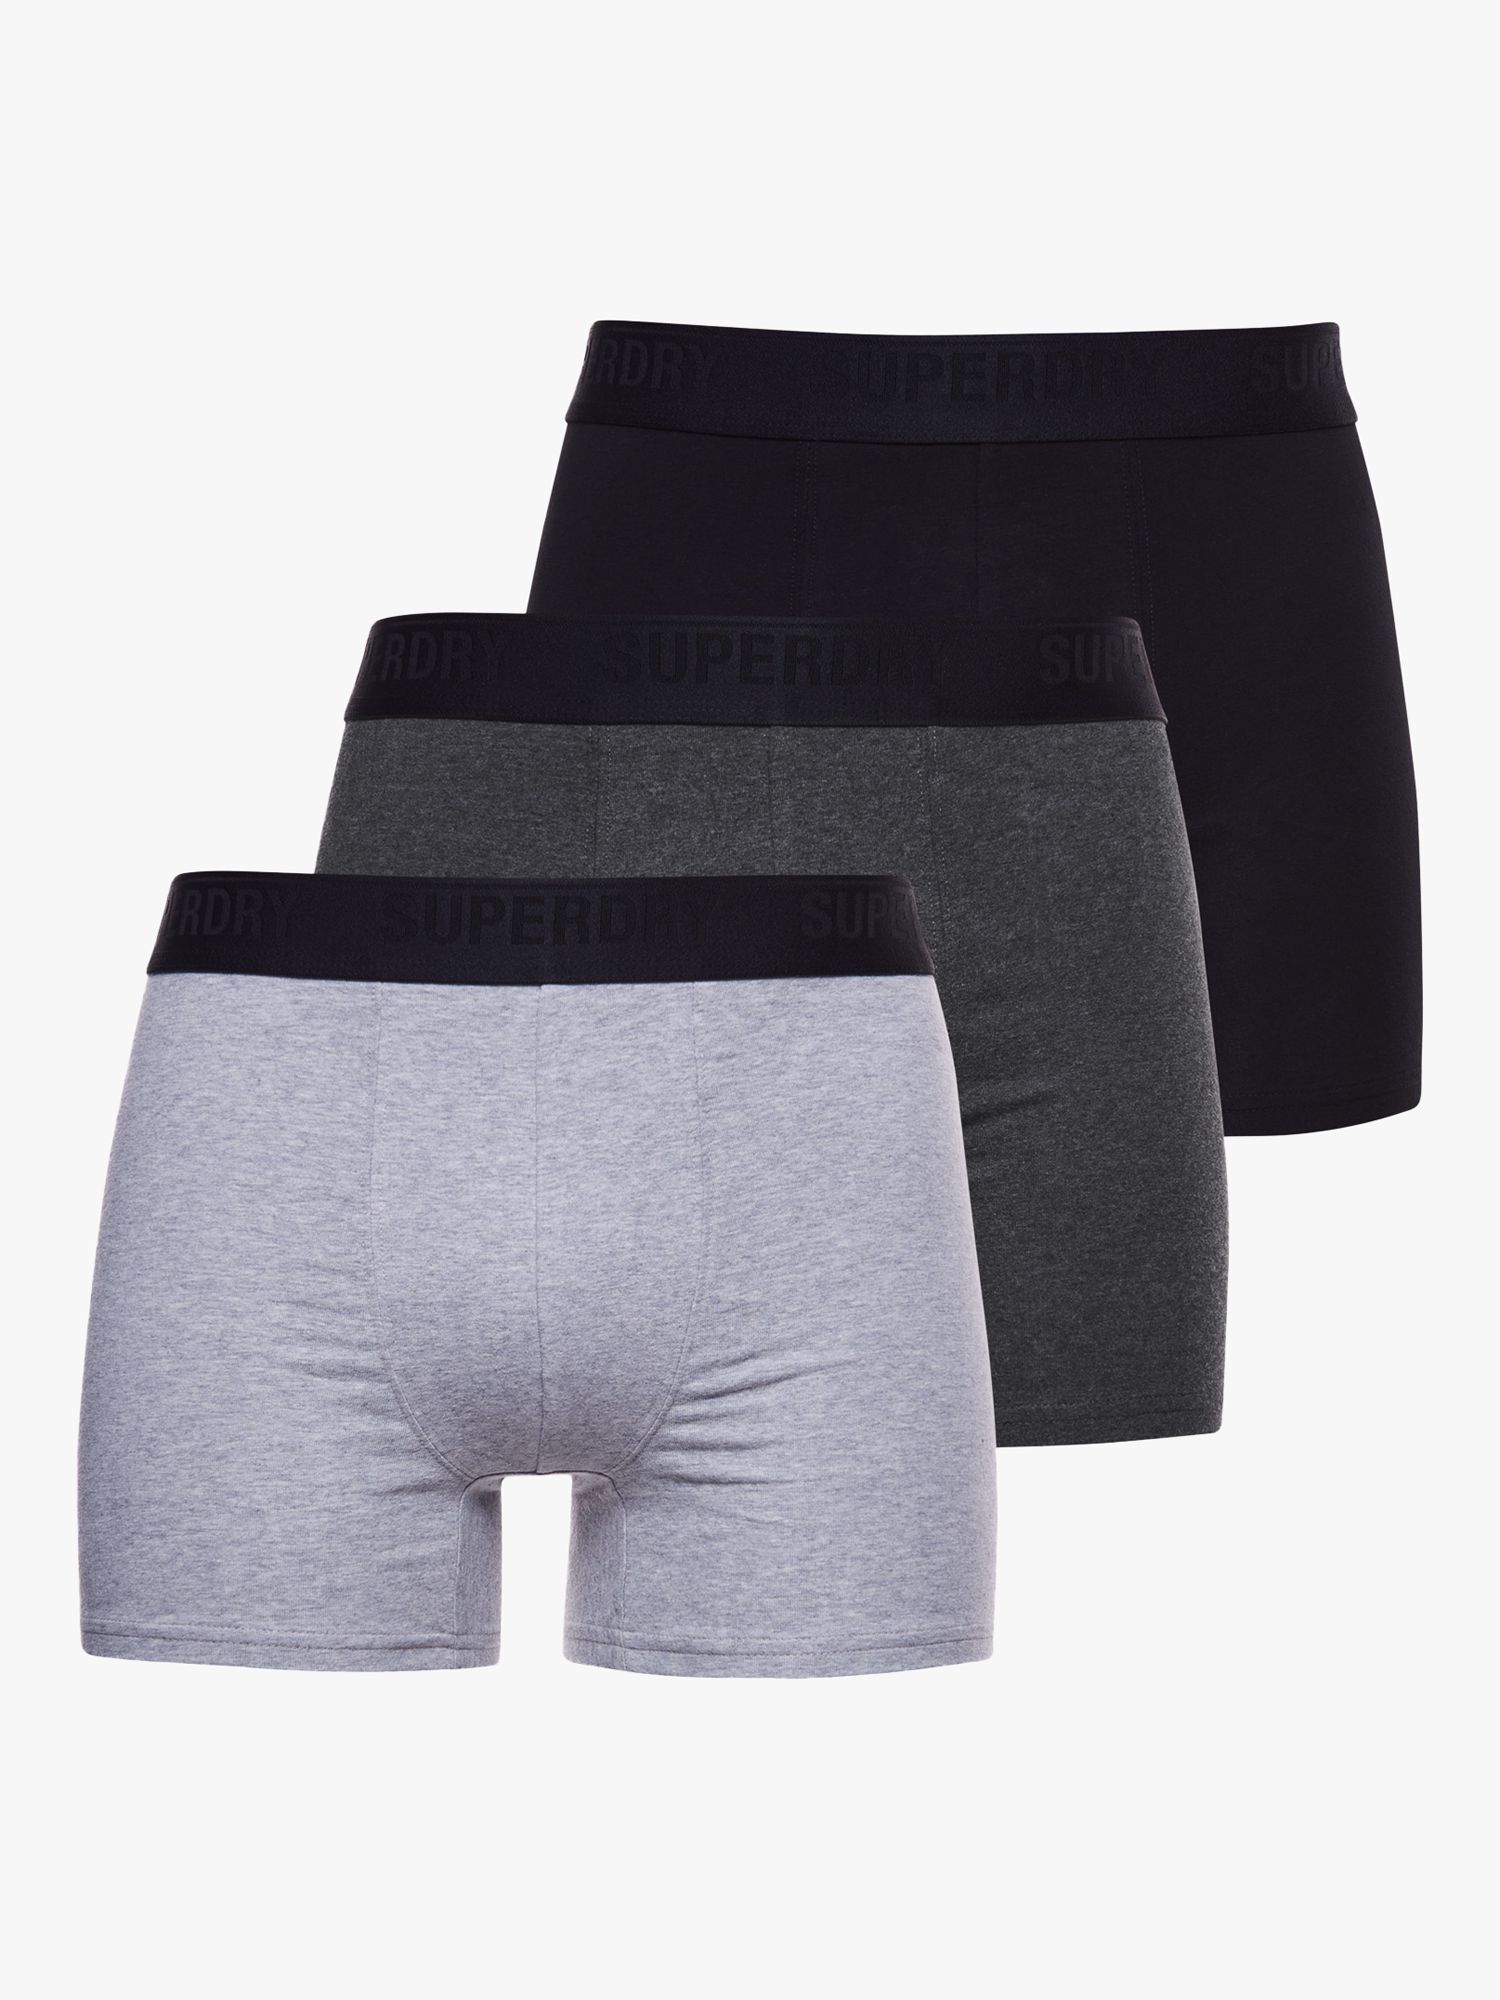 Superdry Organic Cotton Blend Trunks, Pack of 3, Black/Charcoal/Grey at ...